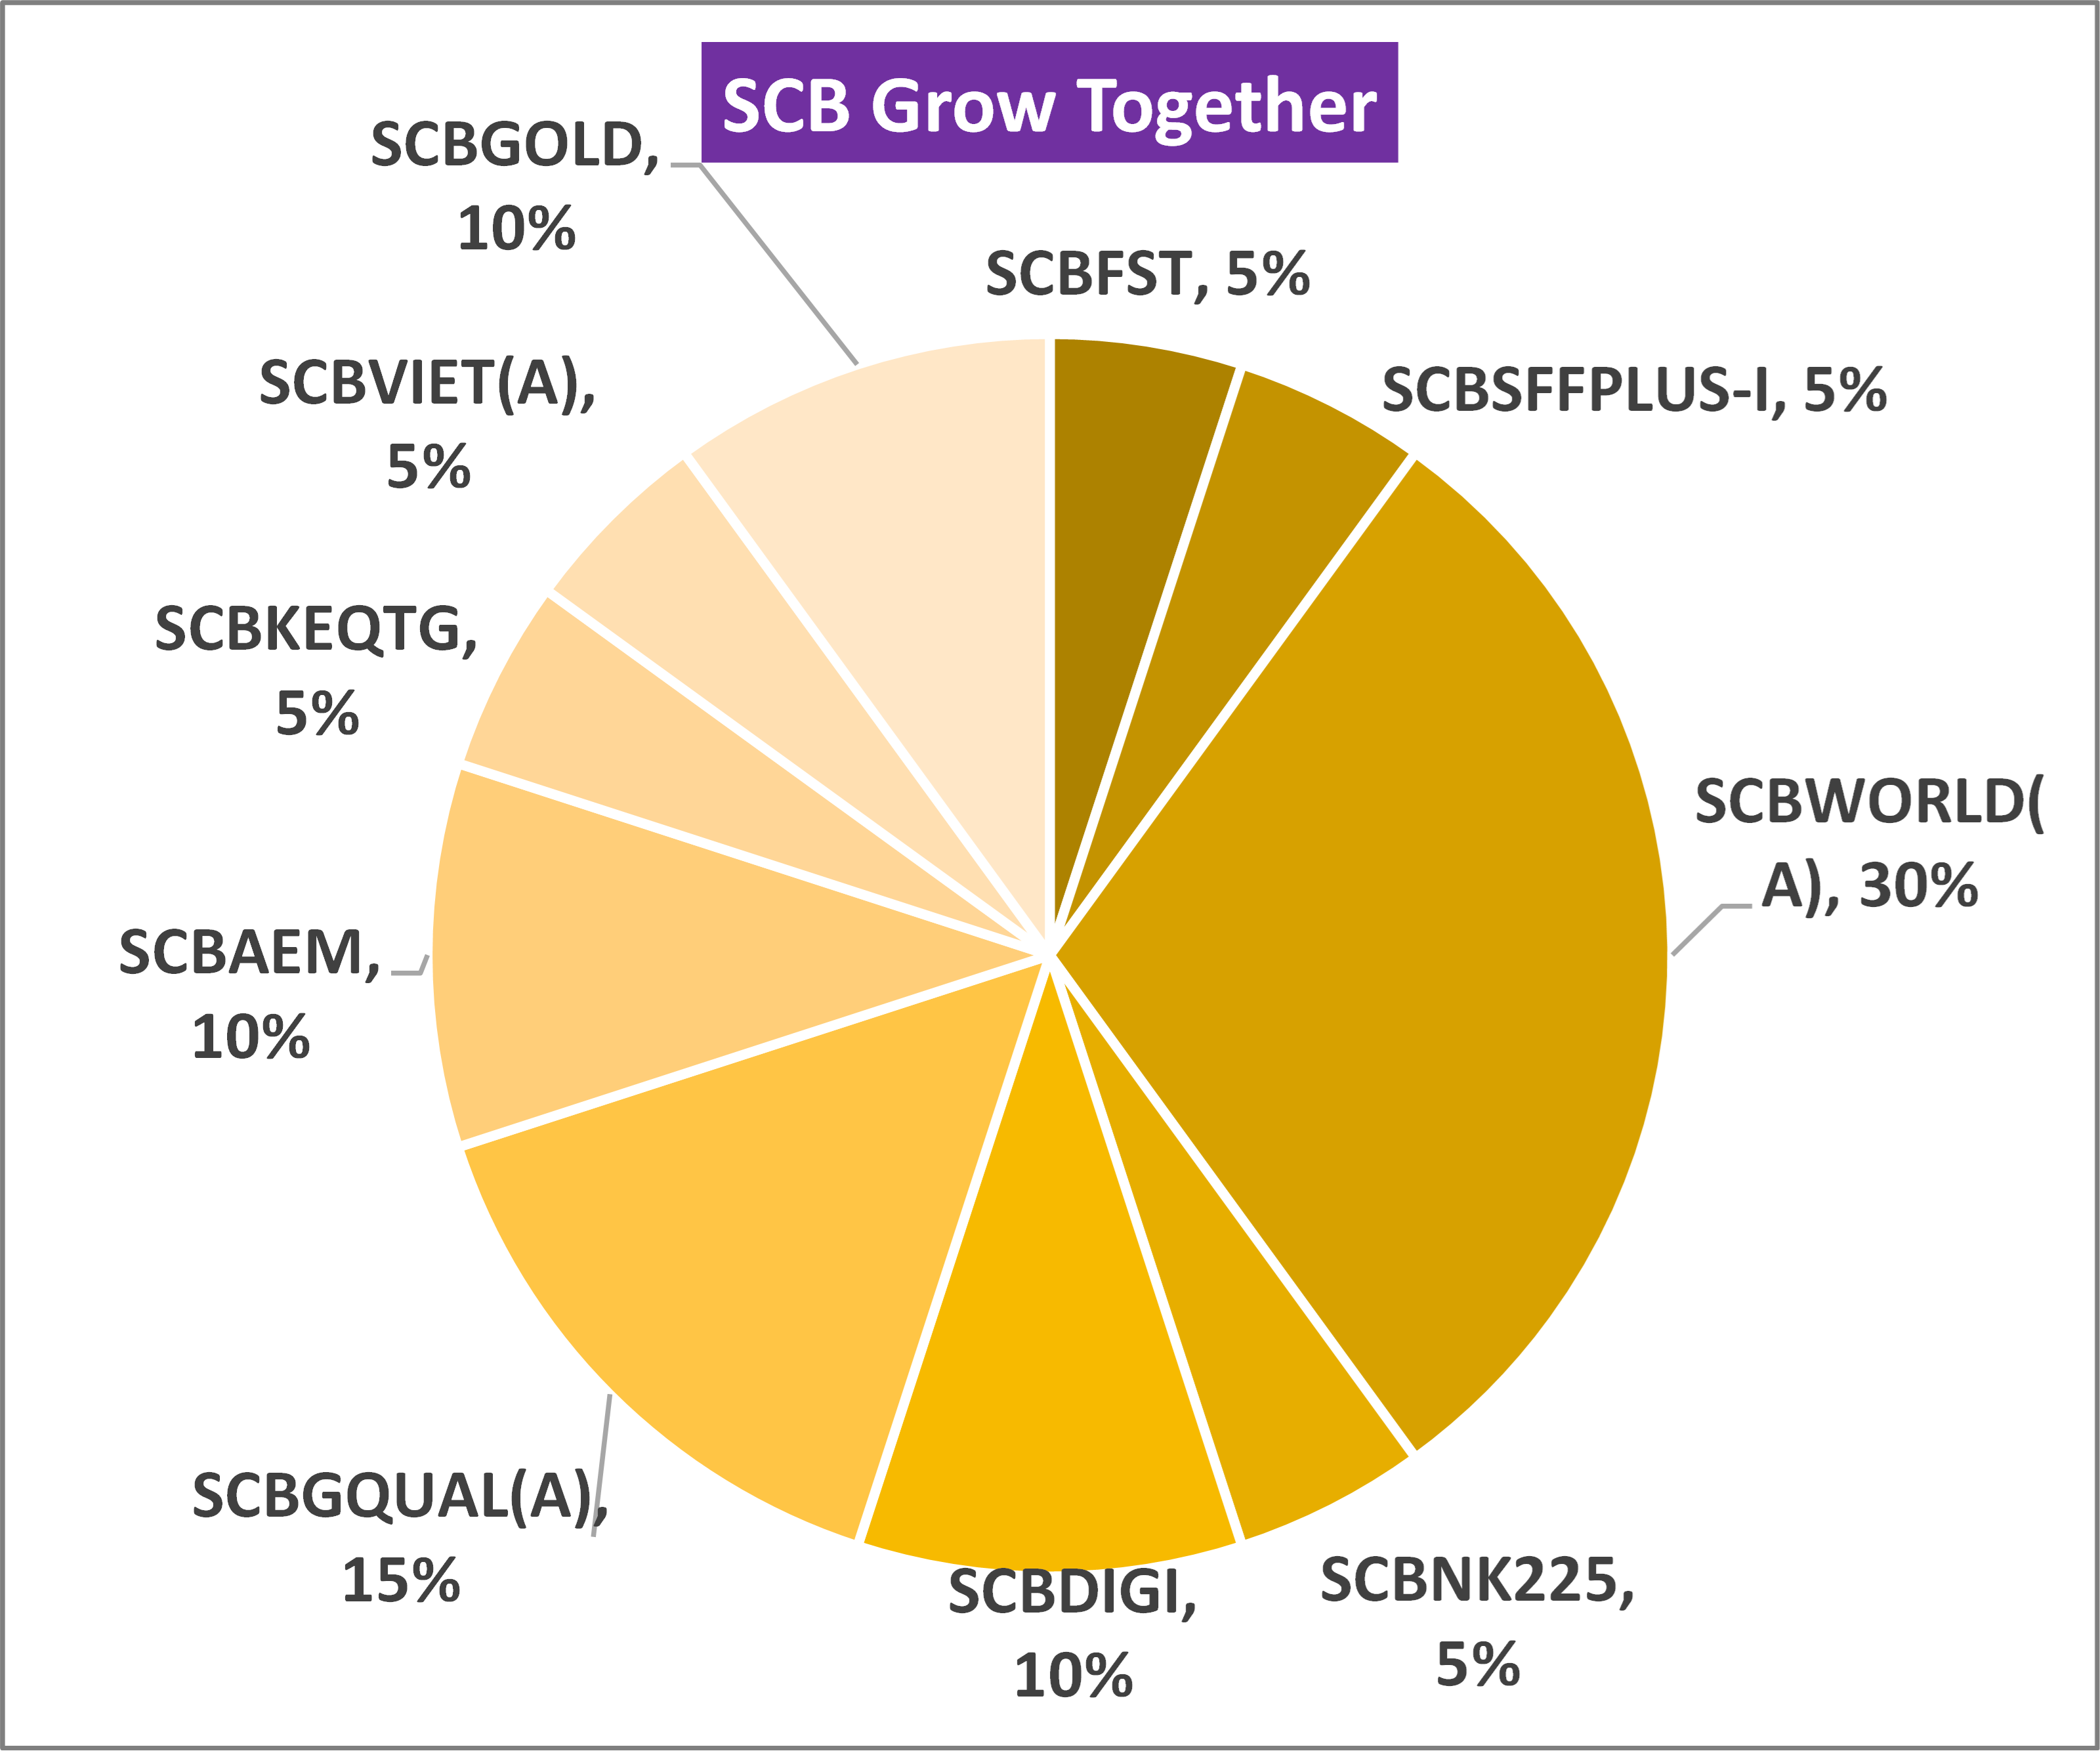 SCB Grow Together 